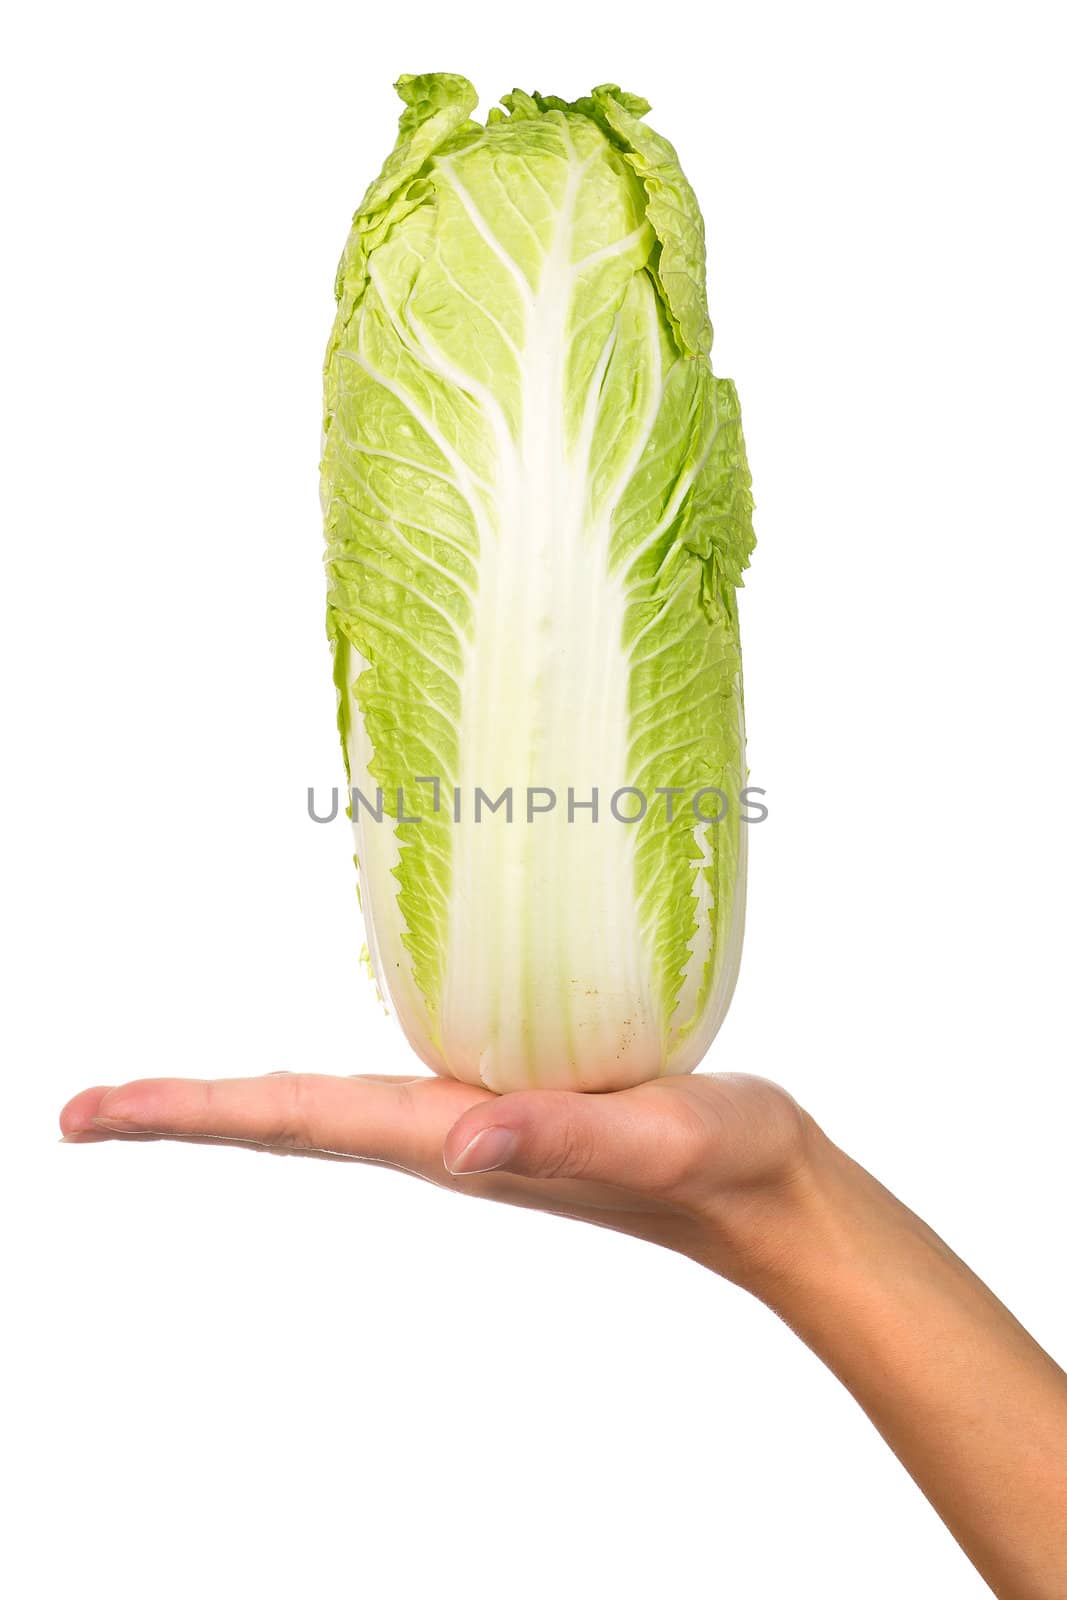 Hand holding napa cabbage isolated on a white background